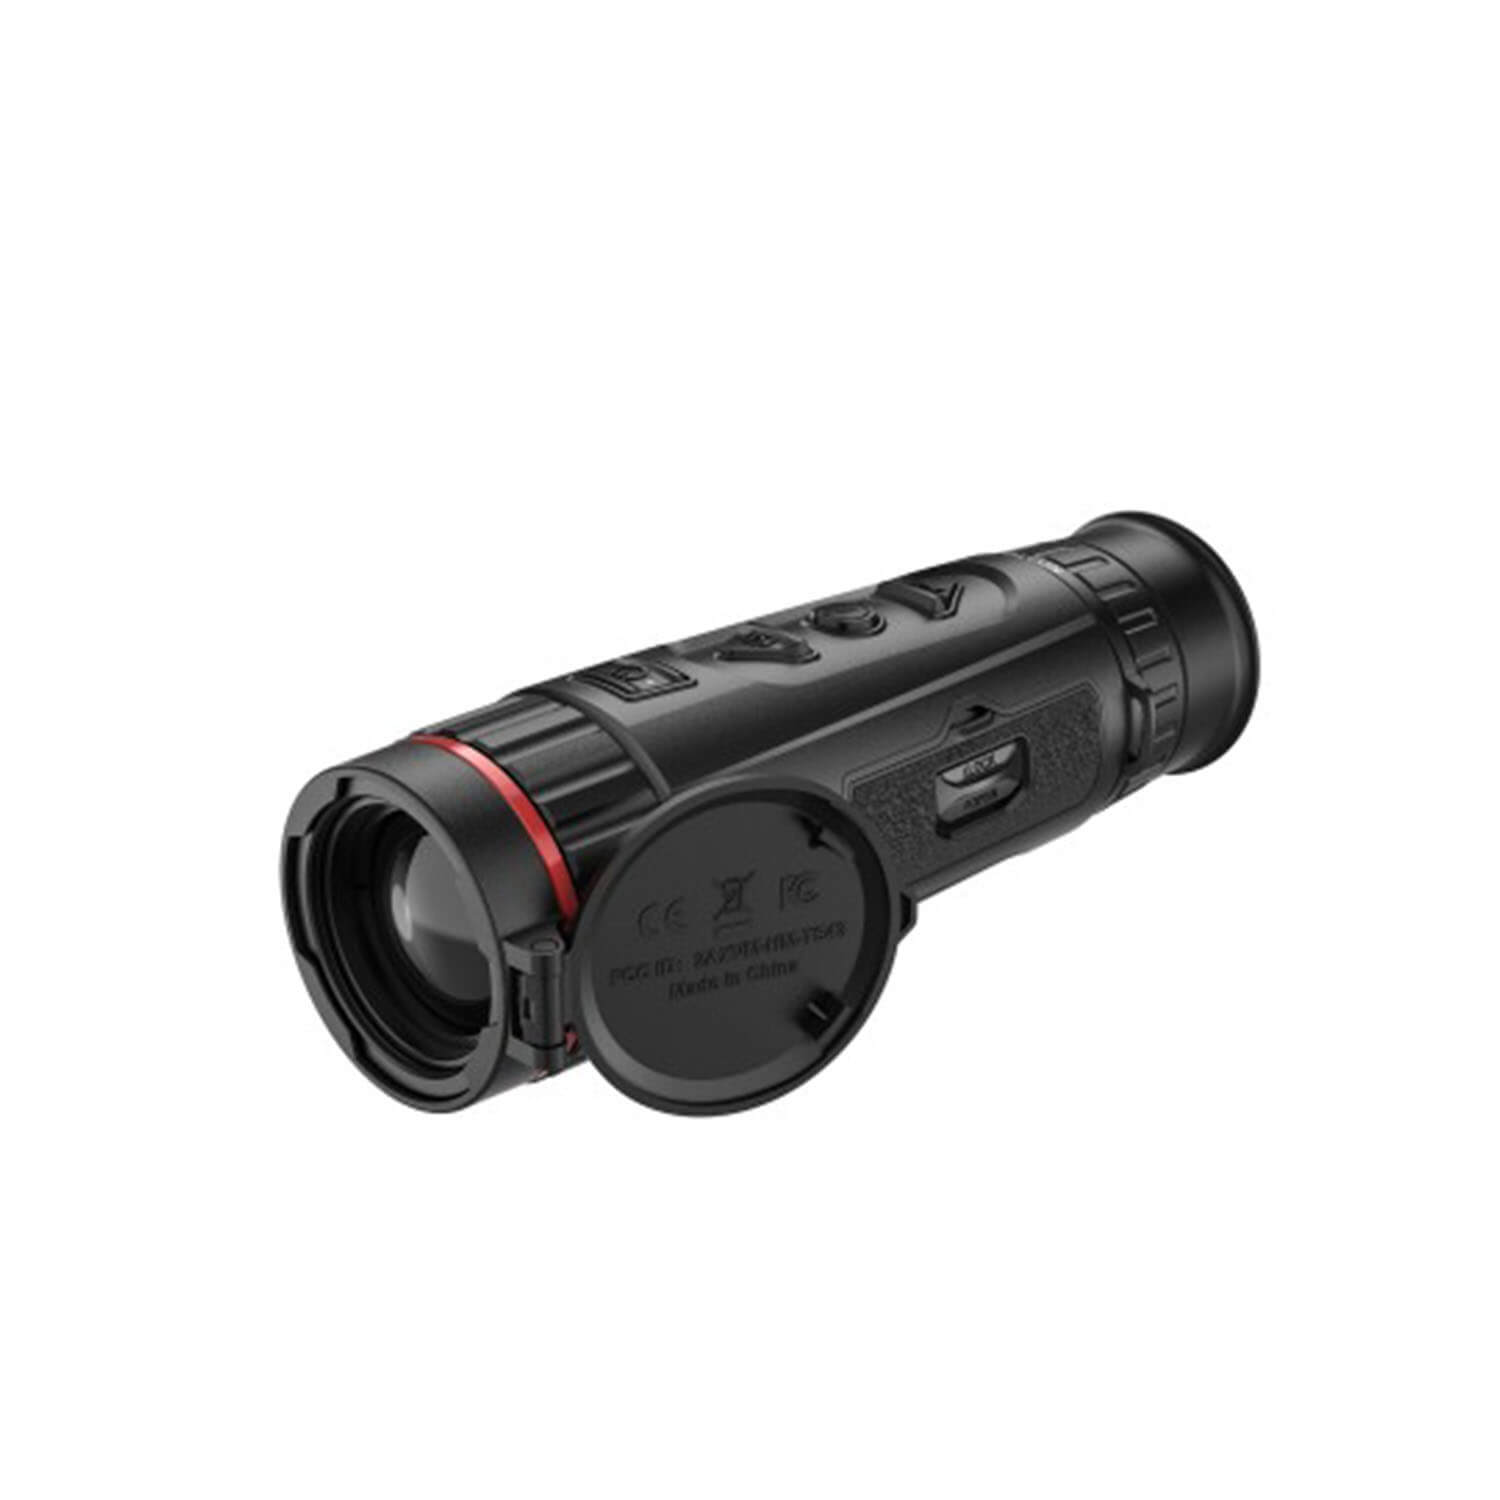 Hikmicro thermal imaging scope Falcon FH35